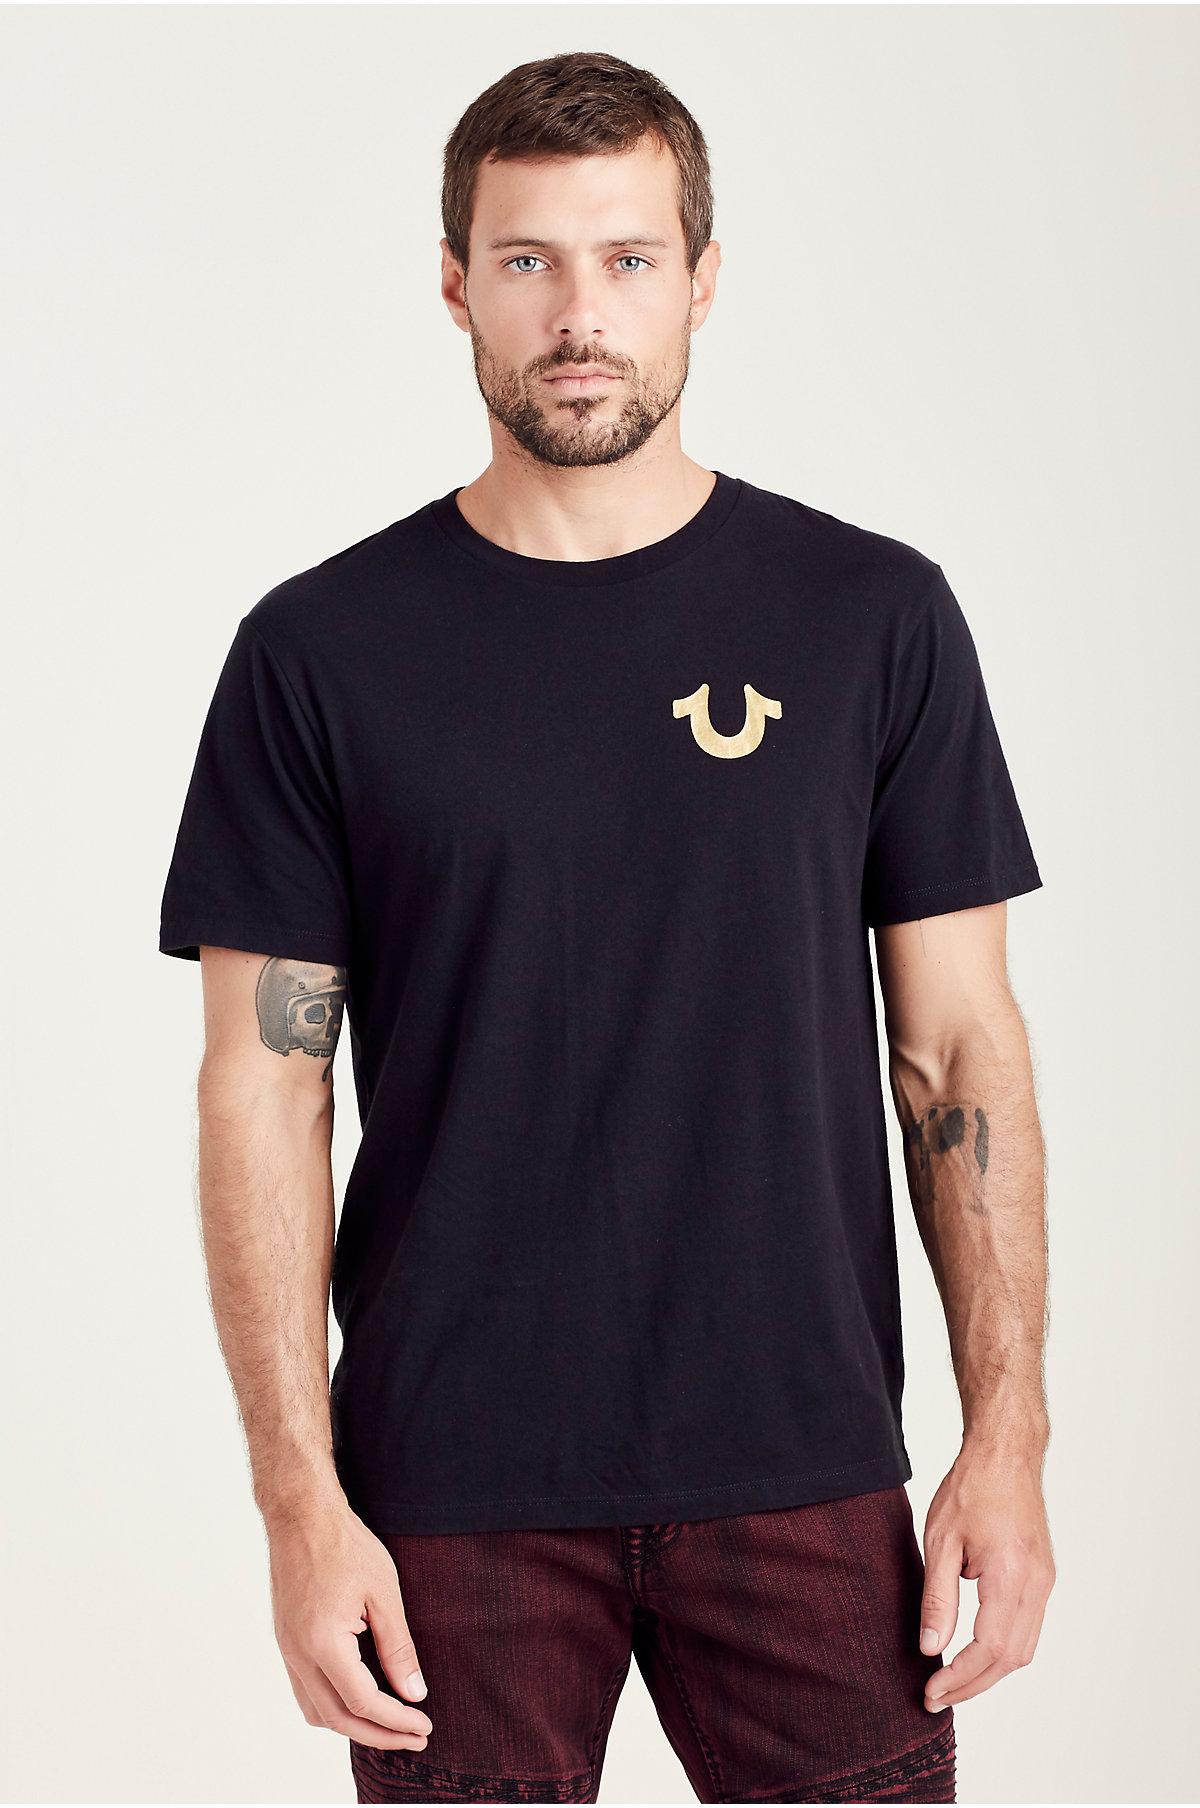 true religion shirts black and gold